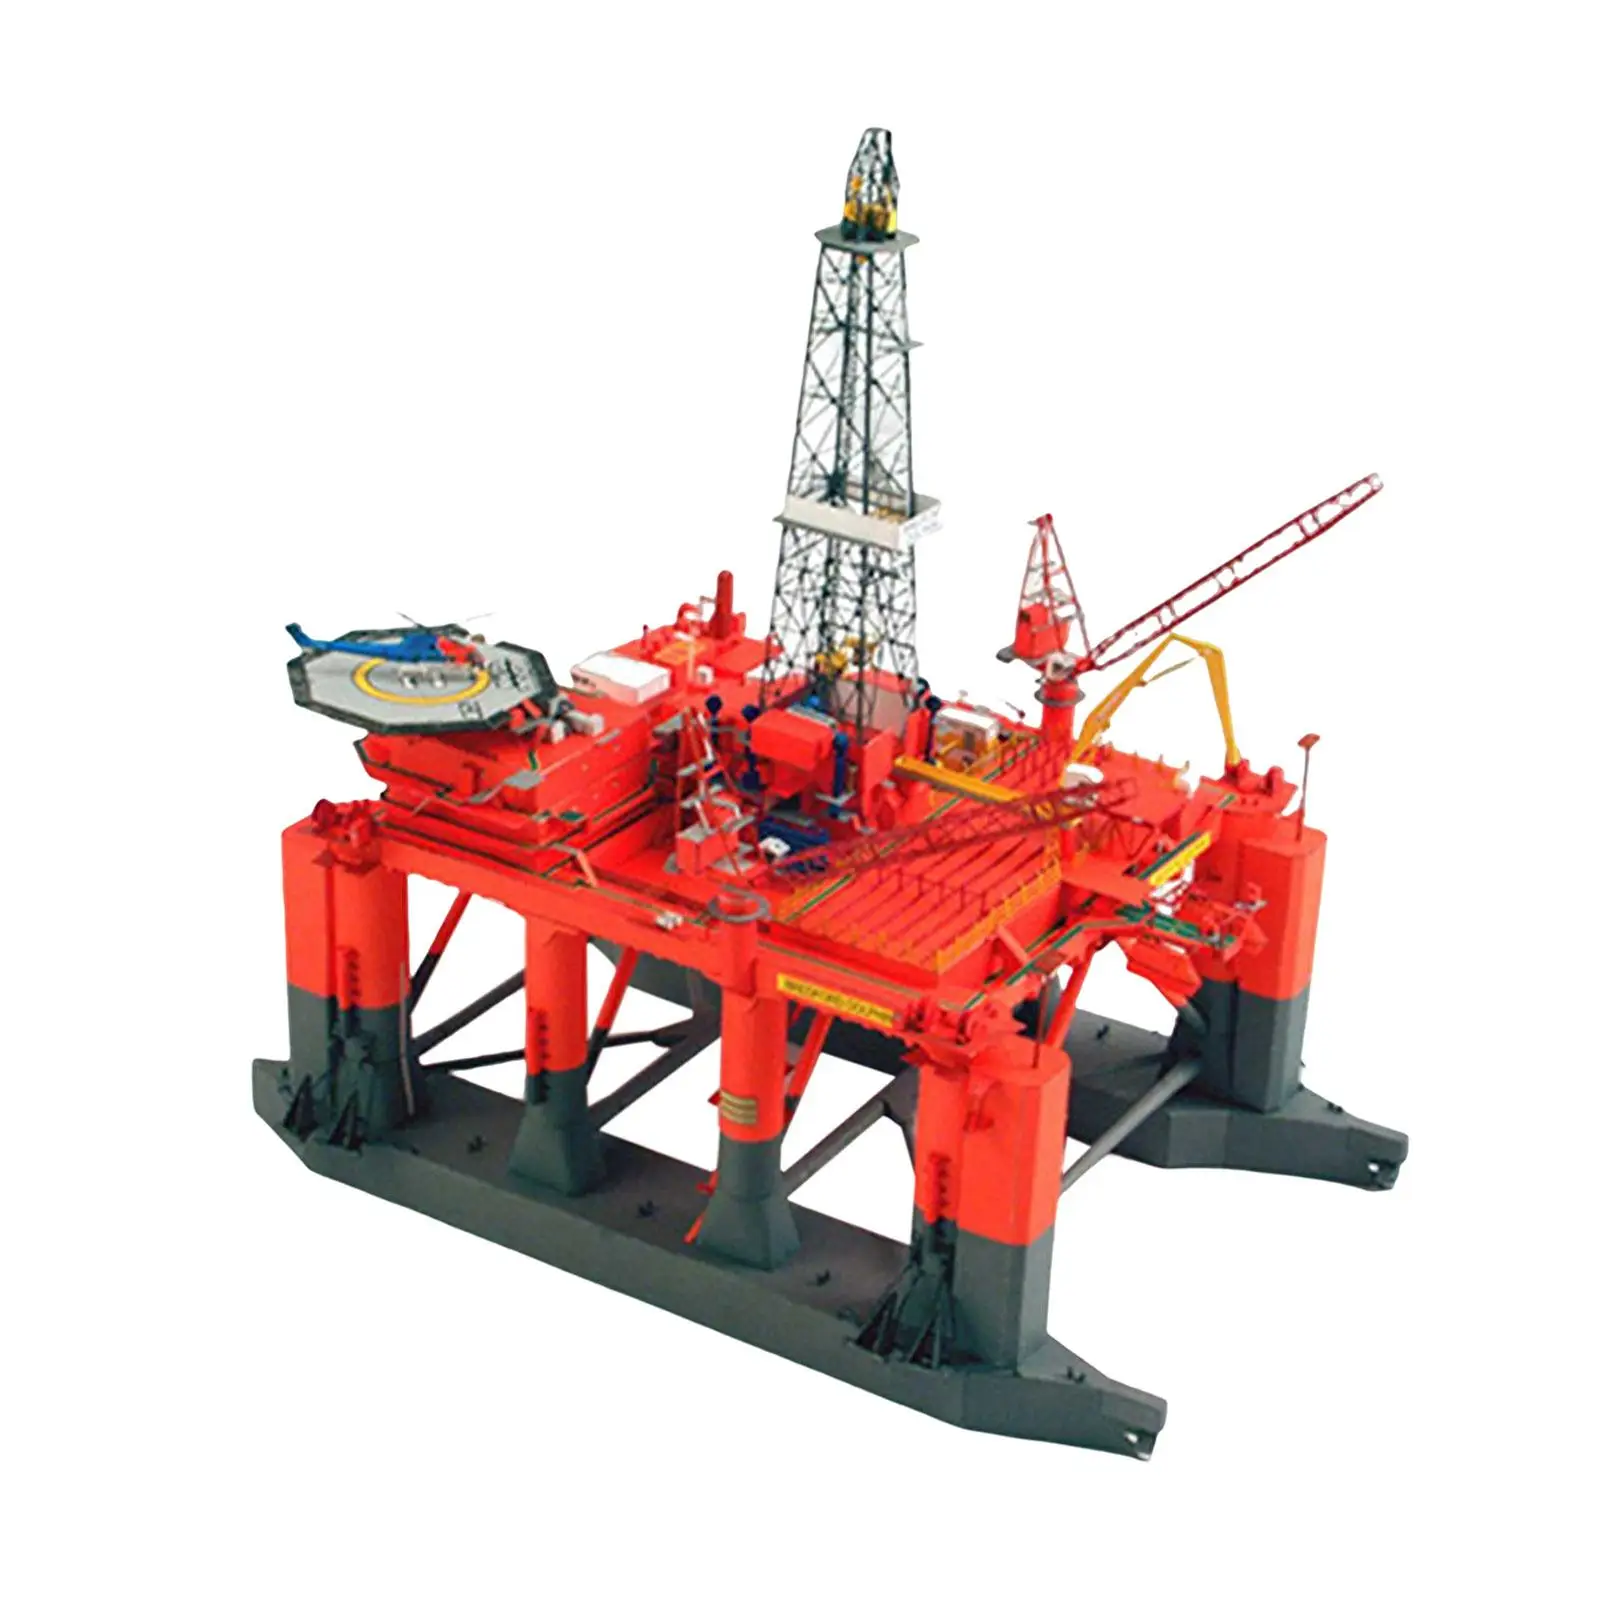 3D 1:400 DIY Semi Submersible Oil Drilling Platform Model Paper Arts Ornaments Accessories Included Home Office Decoration Gift